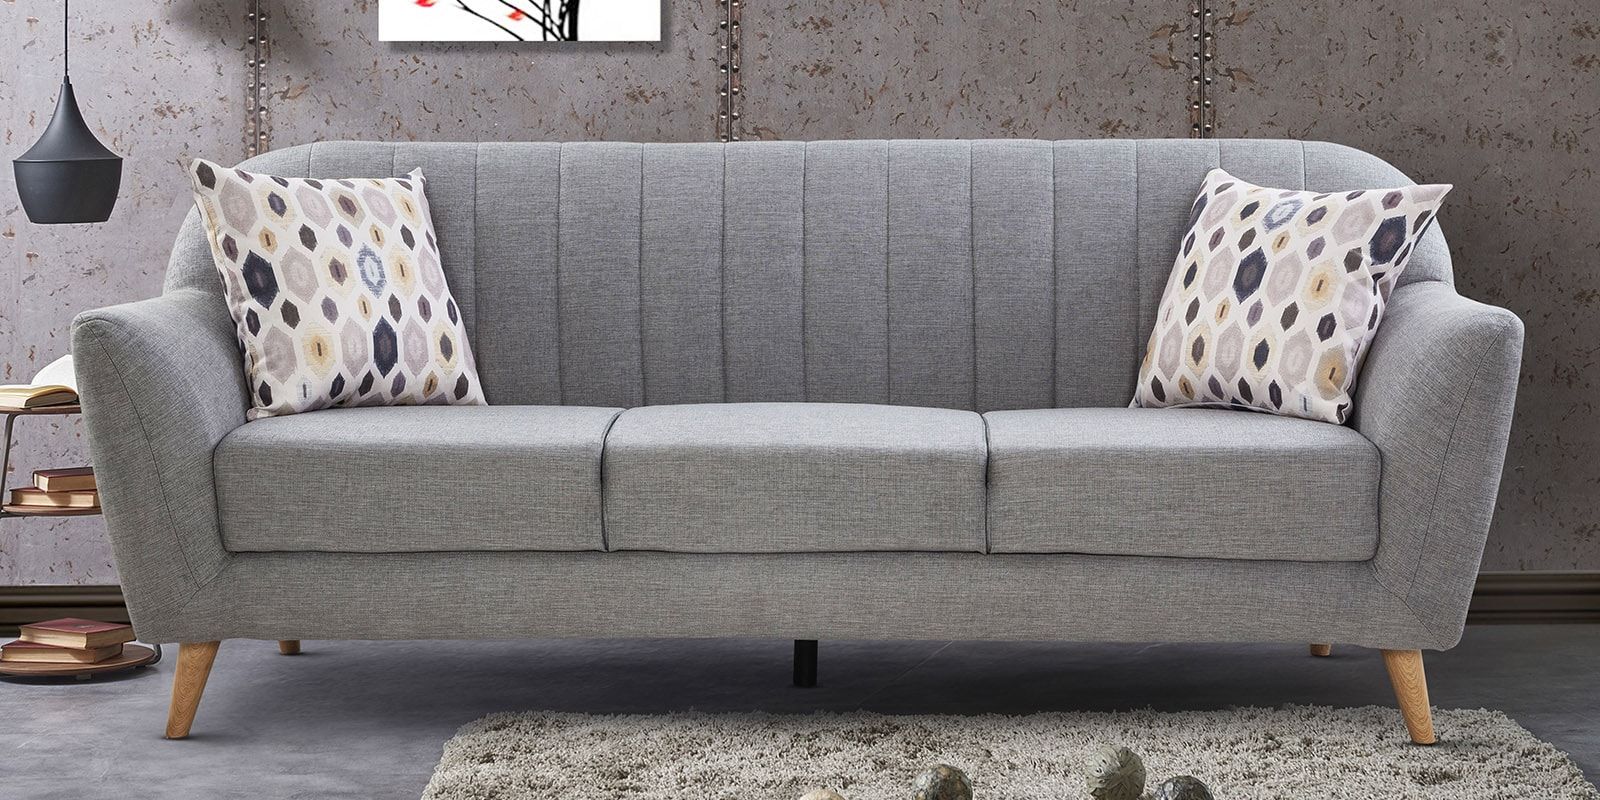 Buy Antalya 3 Seater Sofa In Grey Coloururban Living Online – Mid Regarding Mid Century 3 Seat Couches (View 4 of 20)